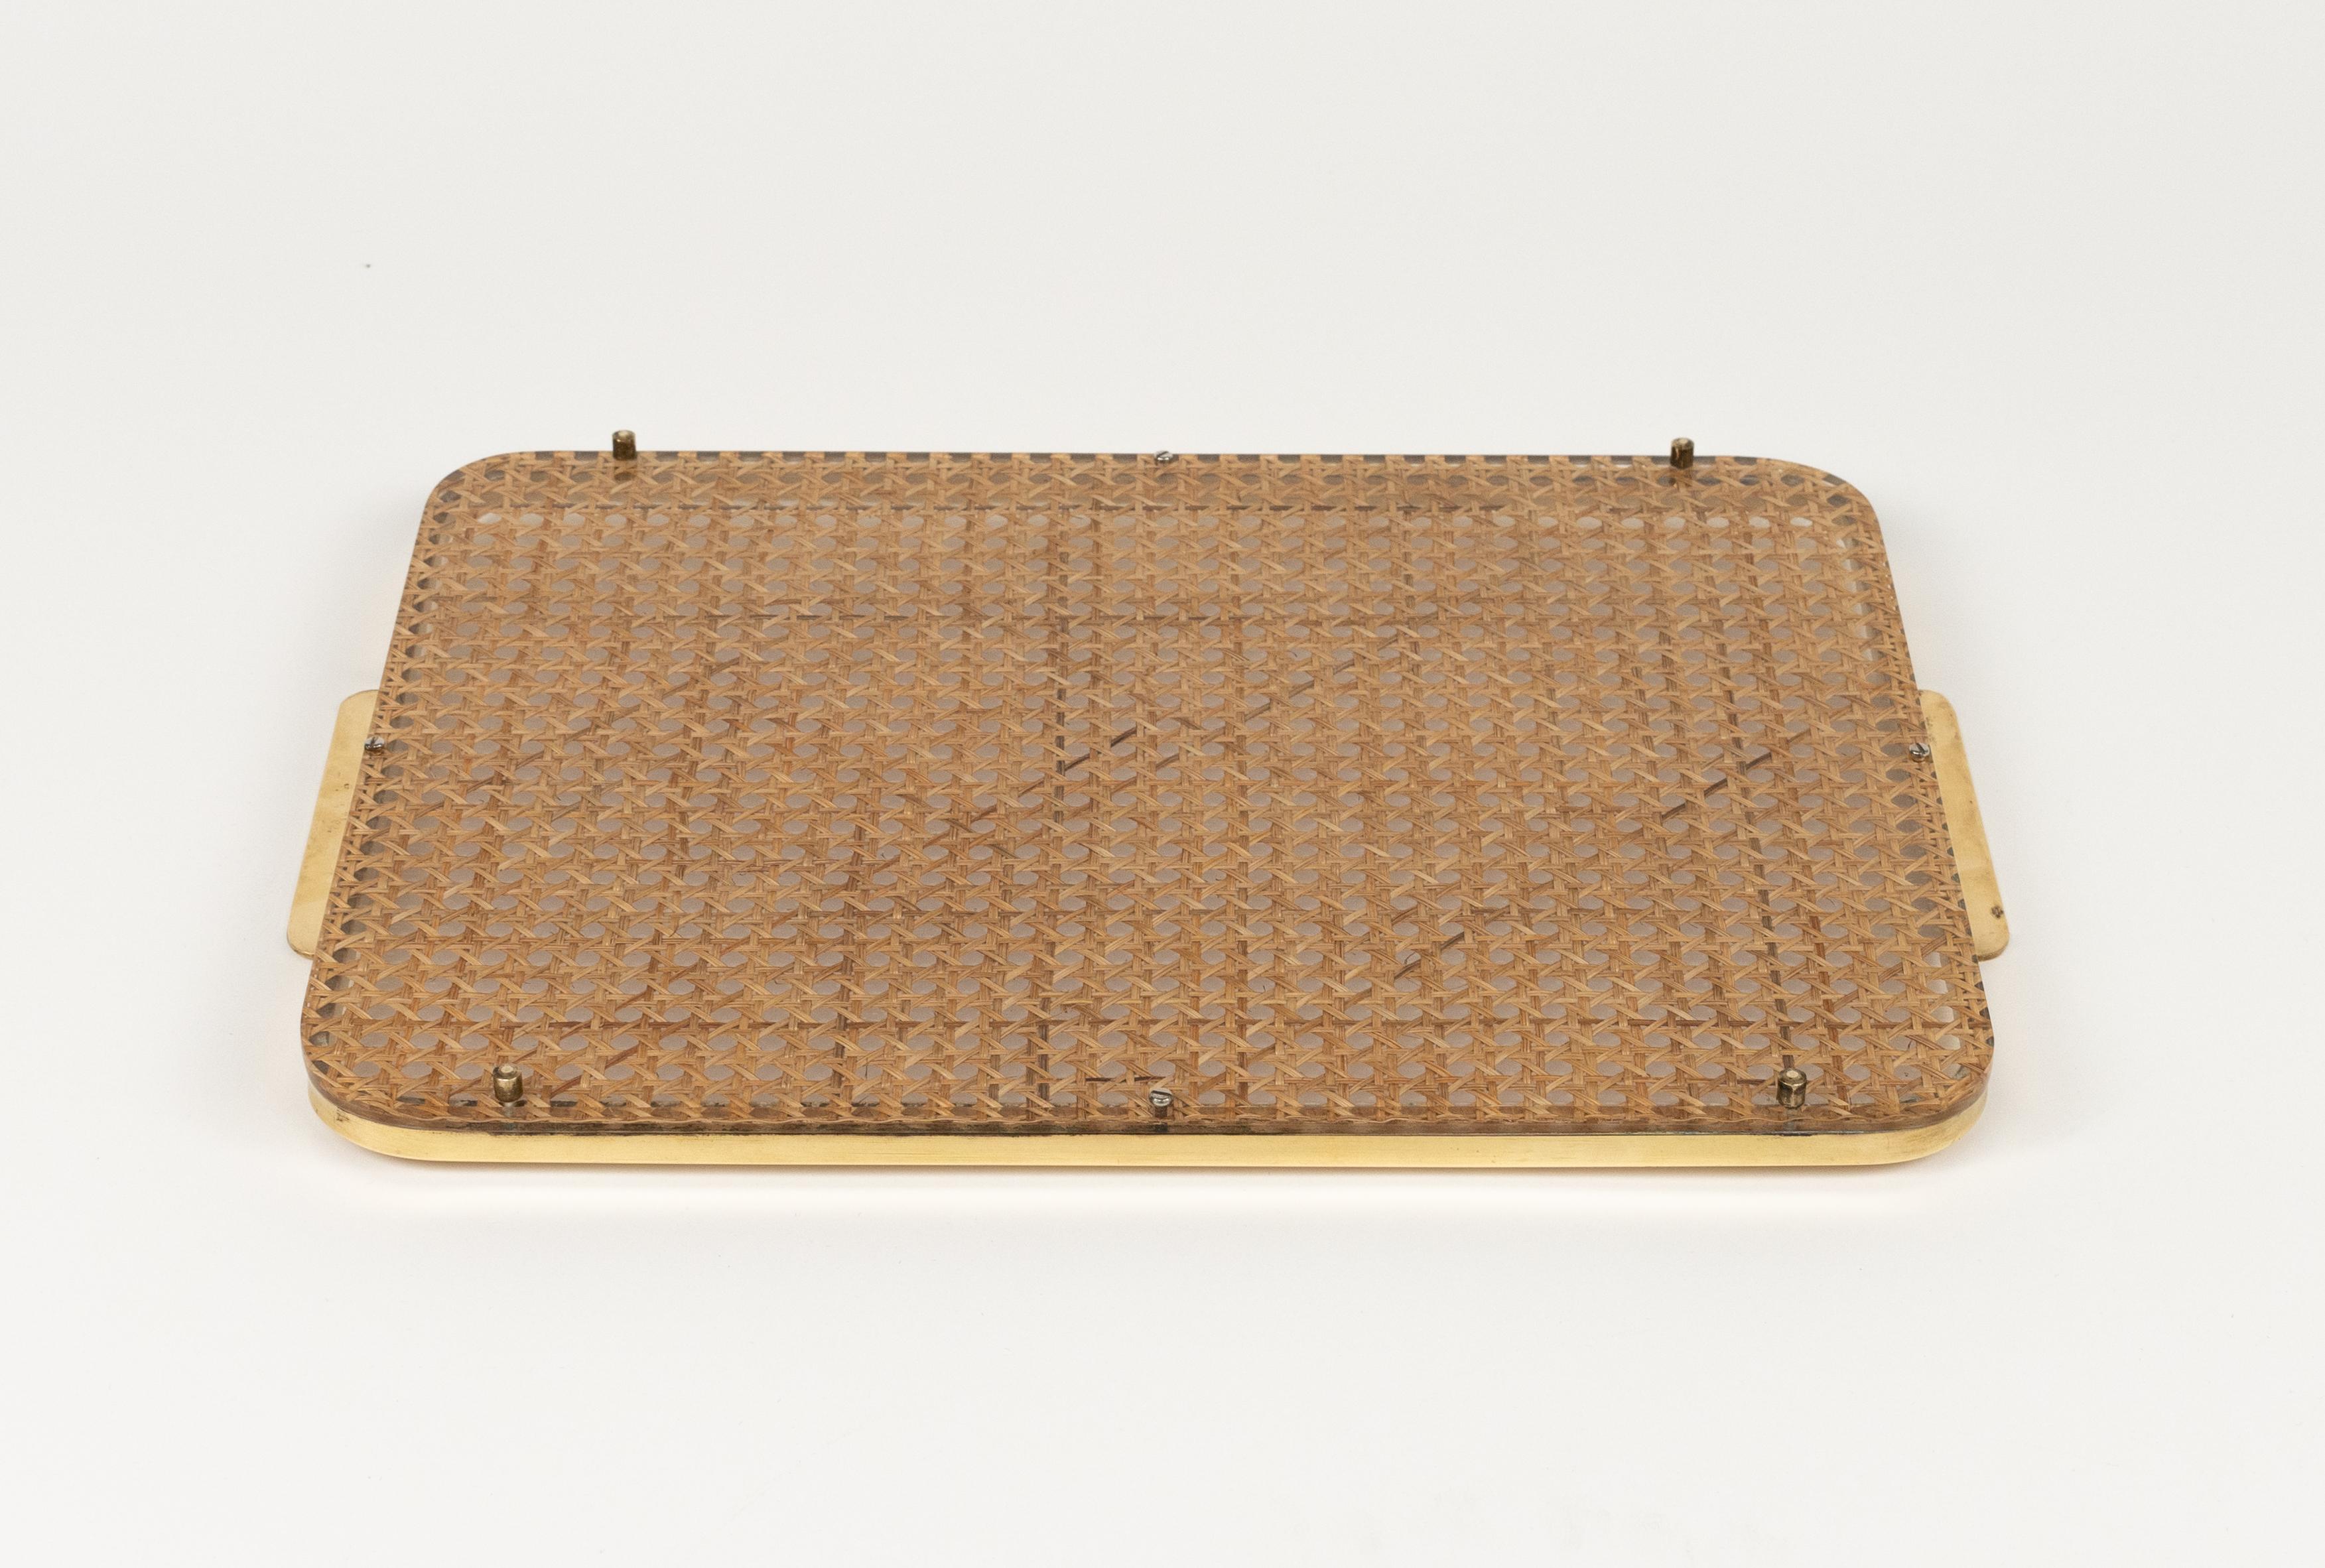 Serving Tray in Lucite, Rattan and Brass Christian Dior Style, Italy, 1970s For Sale 9